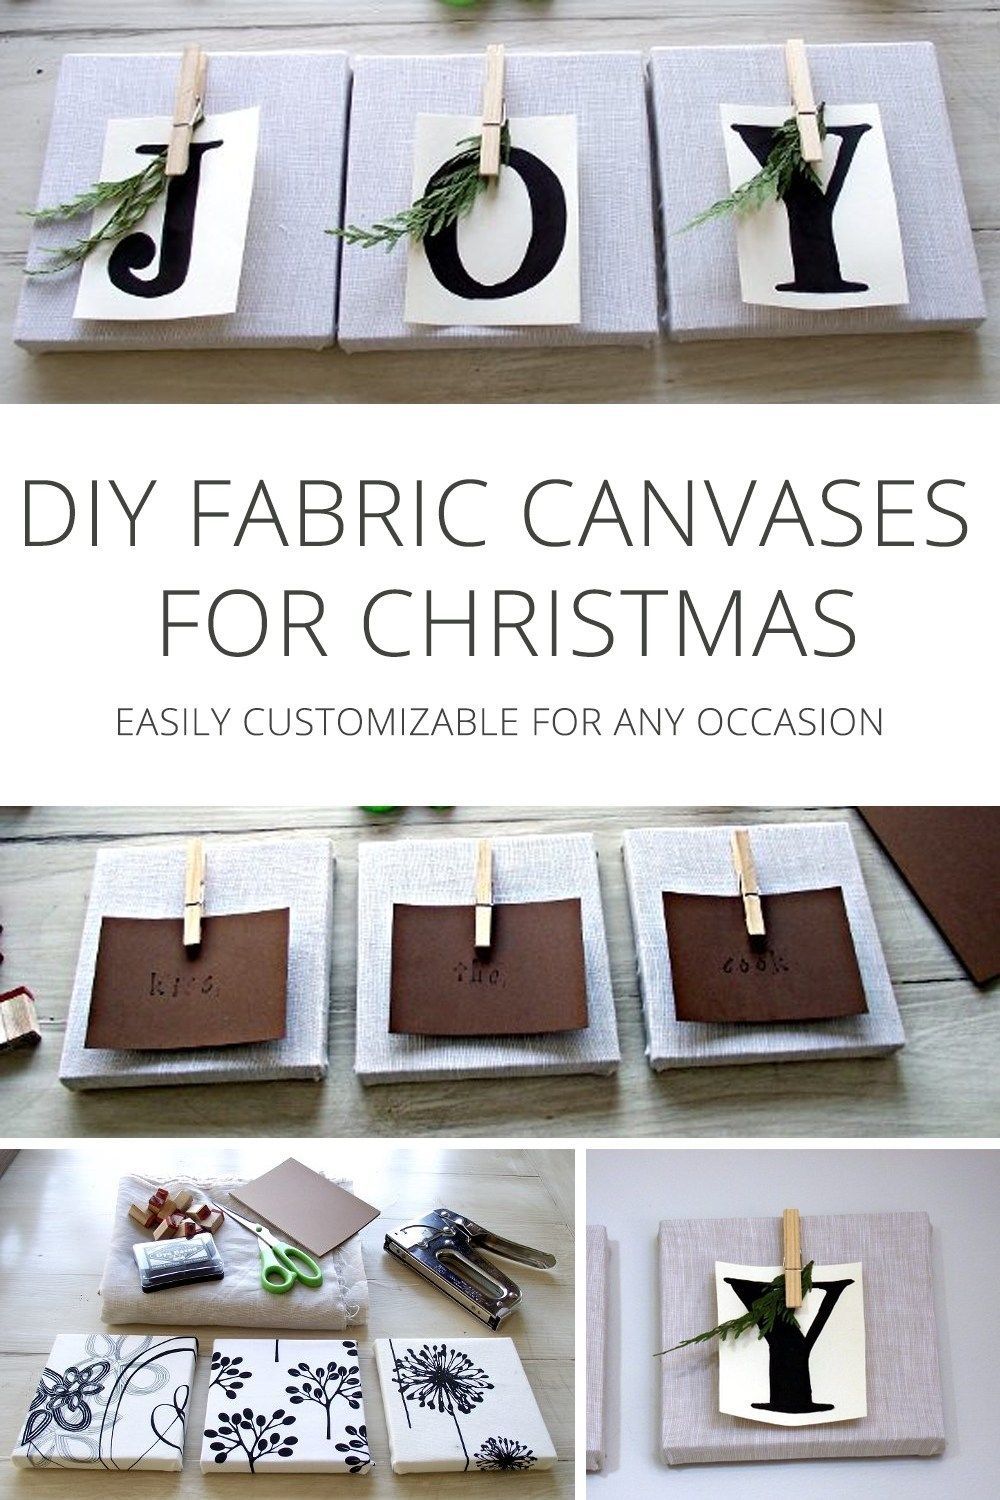 DIY Fabric Canvases for Christmas and Other Occasions -   16 diy projects Decoration canvases ideas